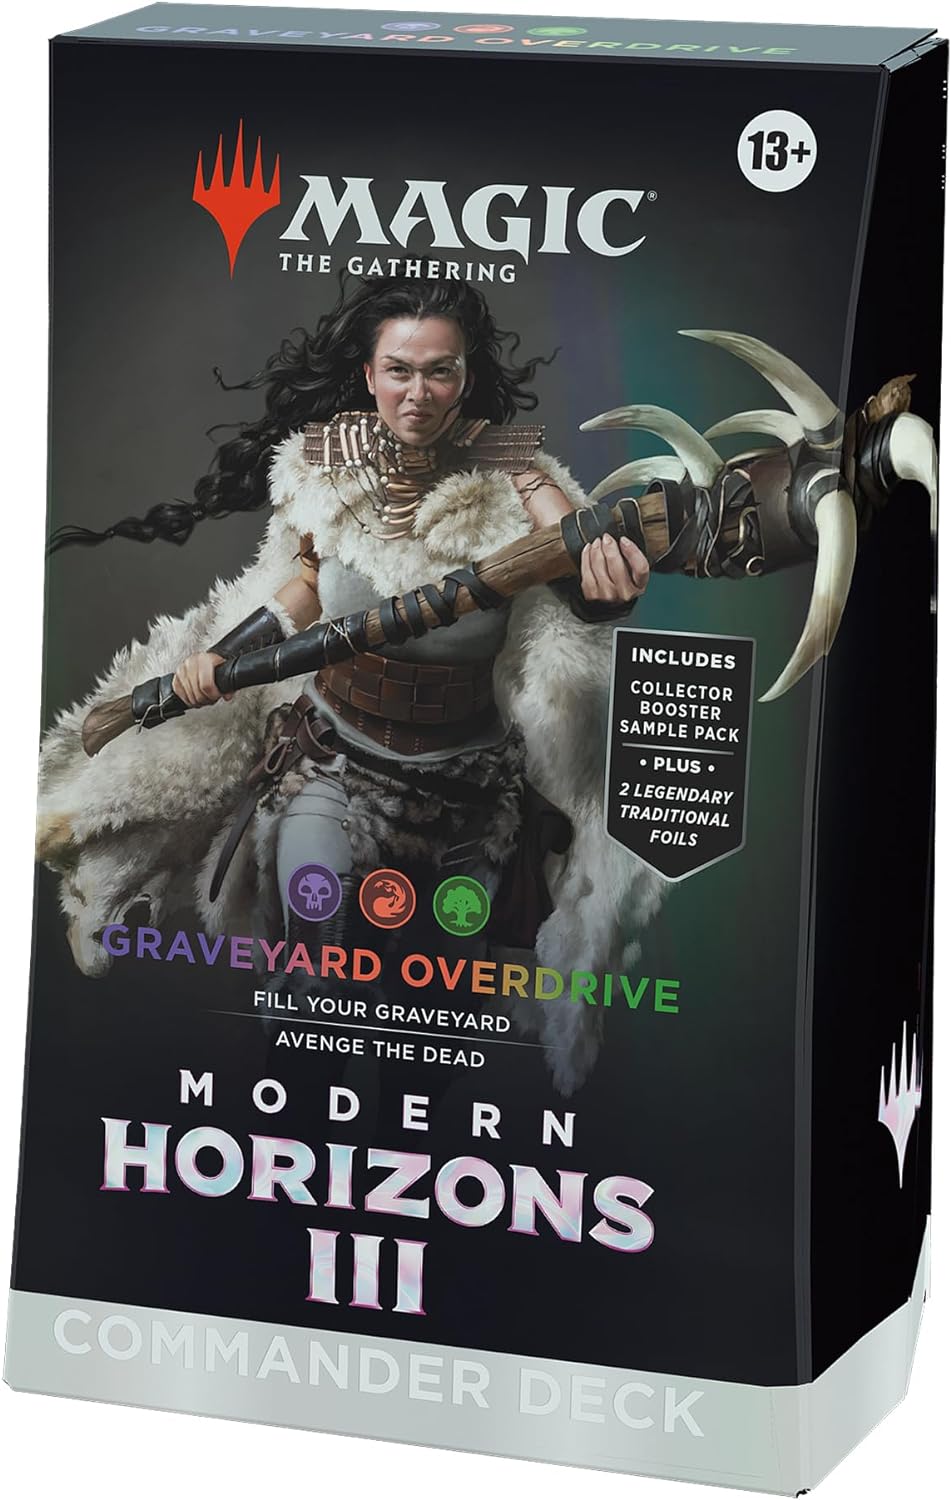 Modern Horizons 3 Commander Deck - Graveyard Overdrive (100-Card Deck, 2-Card Collector Booster Sample Pack + Accessories), Trading Cards made by Magic The Gathering. Exit 23 Games 